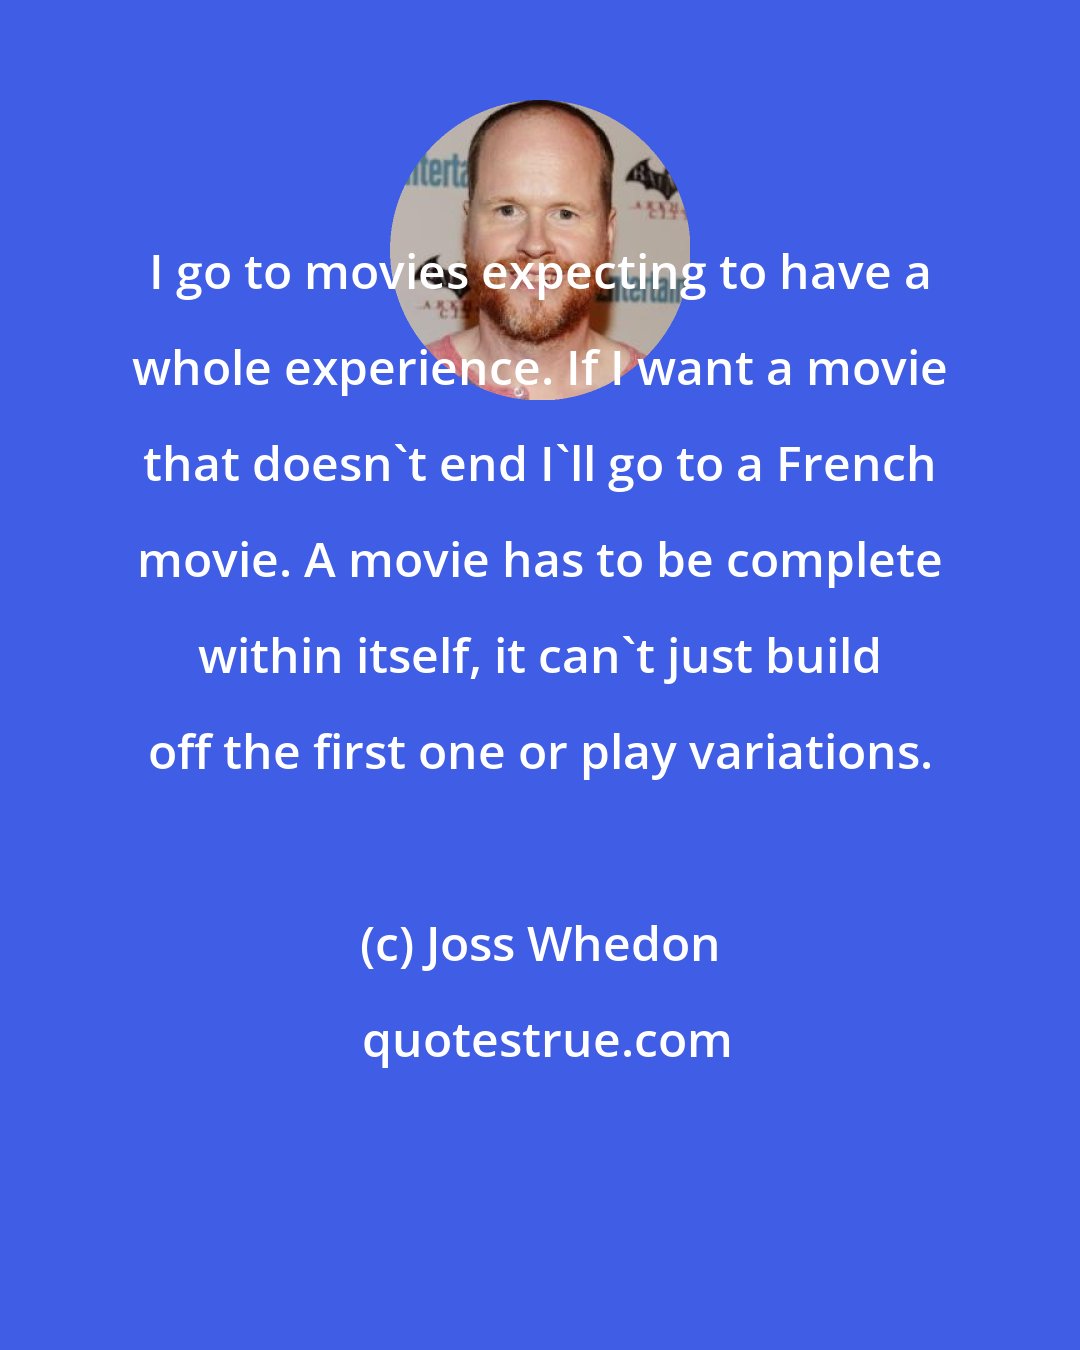 Joss Whedon: I go to movies expecting to have a whole experience. If I want a movie that doesn't end I'll go to a French movie. A movie has to be complete within itself, it can't just build off the first one or play variations.